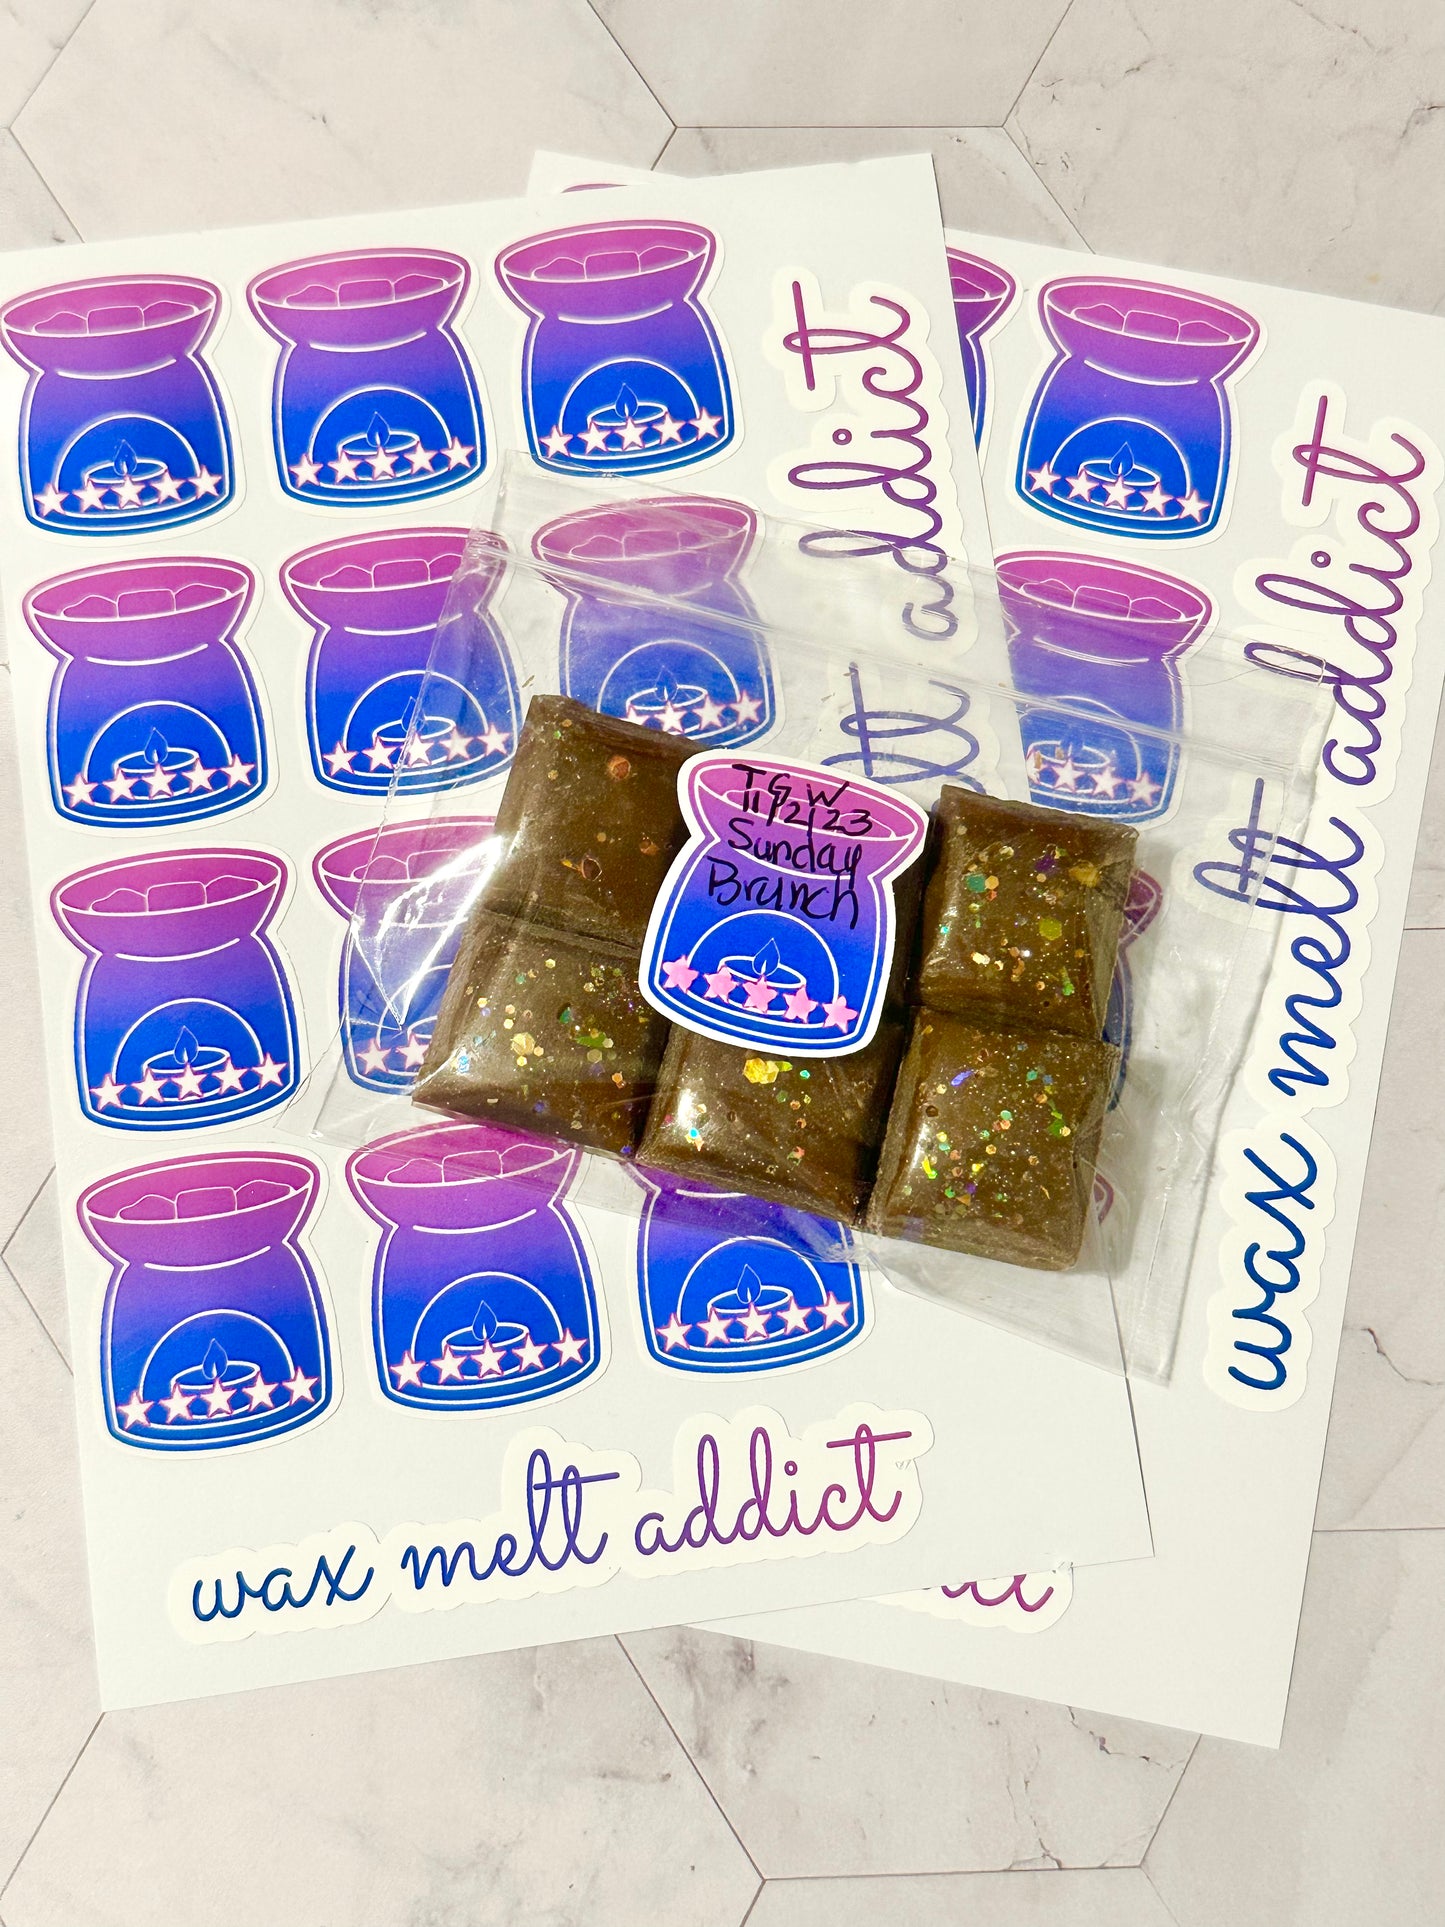 Wax Melt Sticker to Label and Review